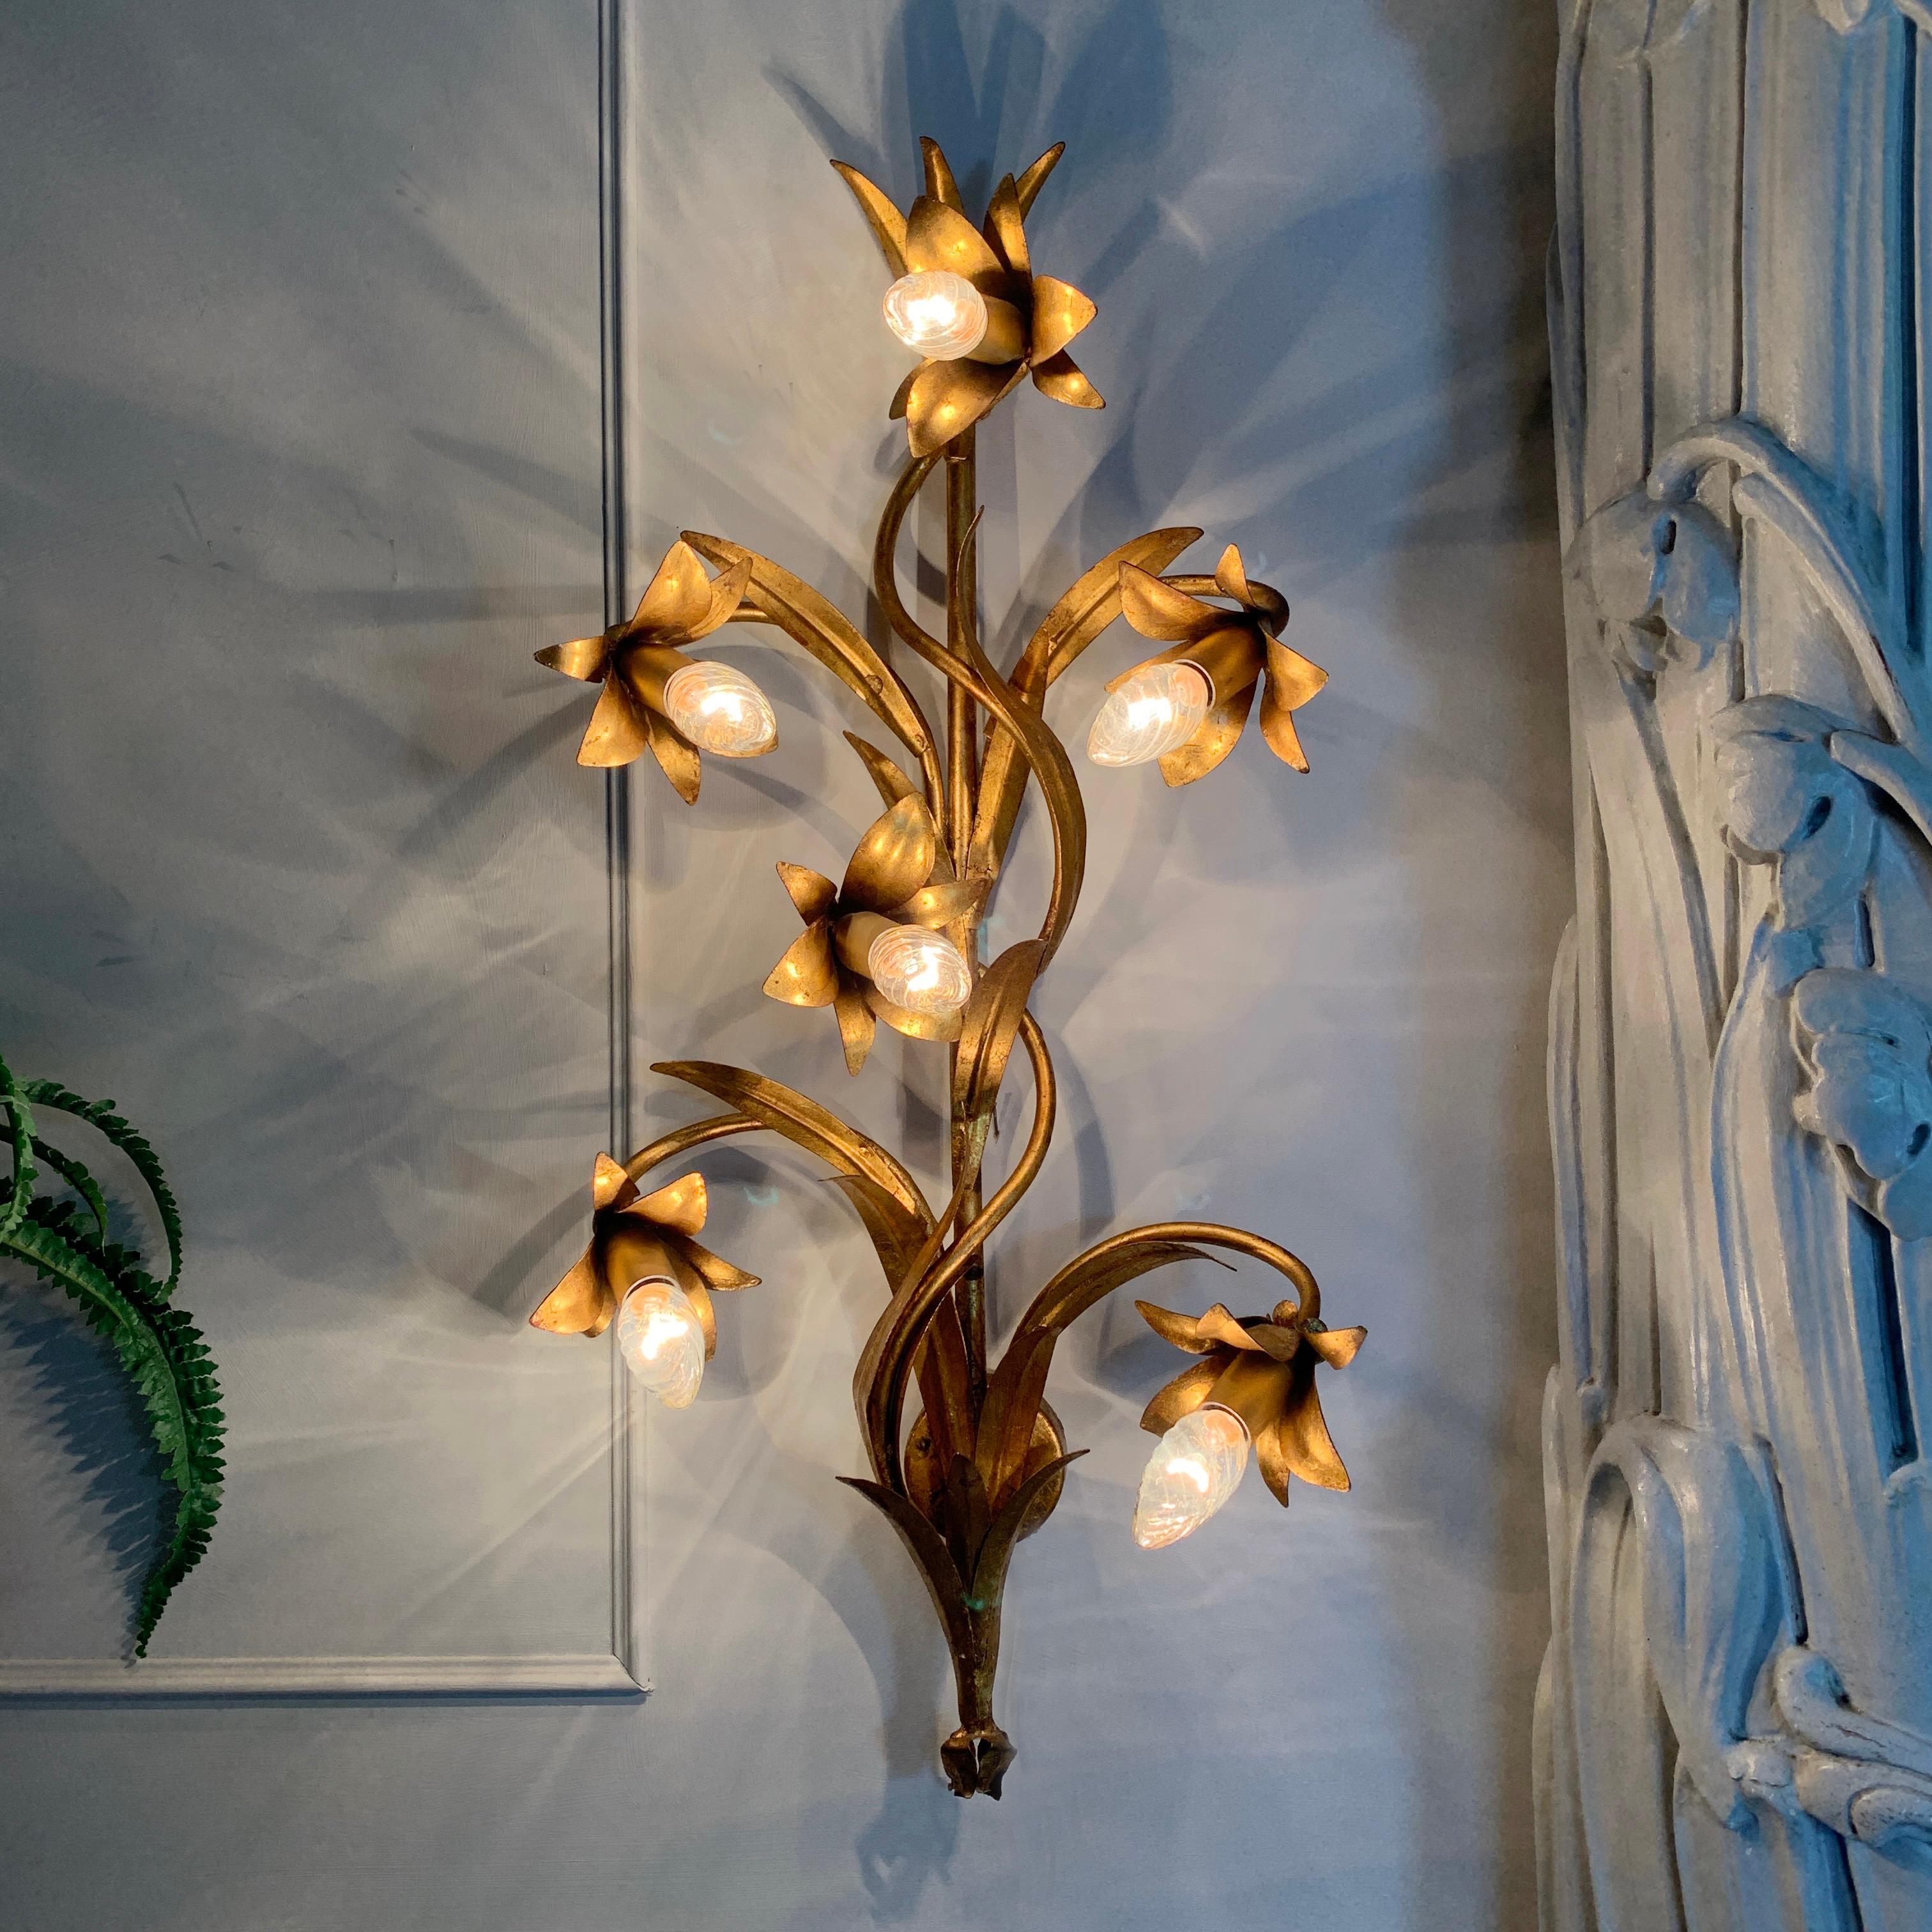 1970's gilt lily wall sconce
Large French wall sconce depicting 6 lily flowers and leaves winding U A central stem
Original gold leaf gilt finish
Measures: 78cm height, 37cm width, 20cm depth, wall rose 8cm
There is a hook at the top of the